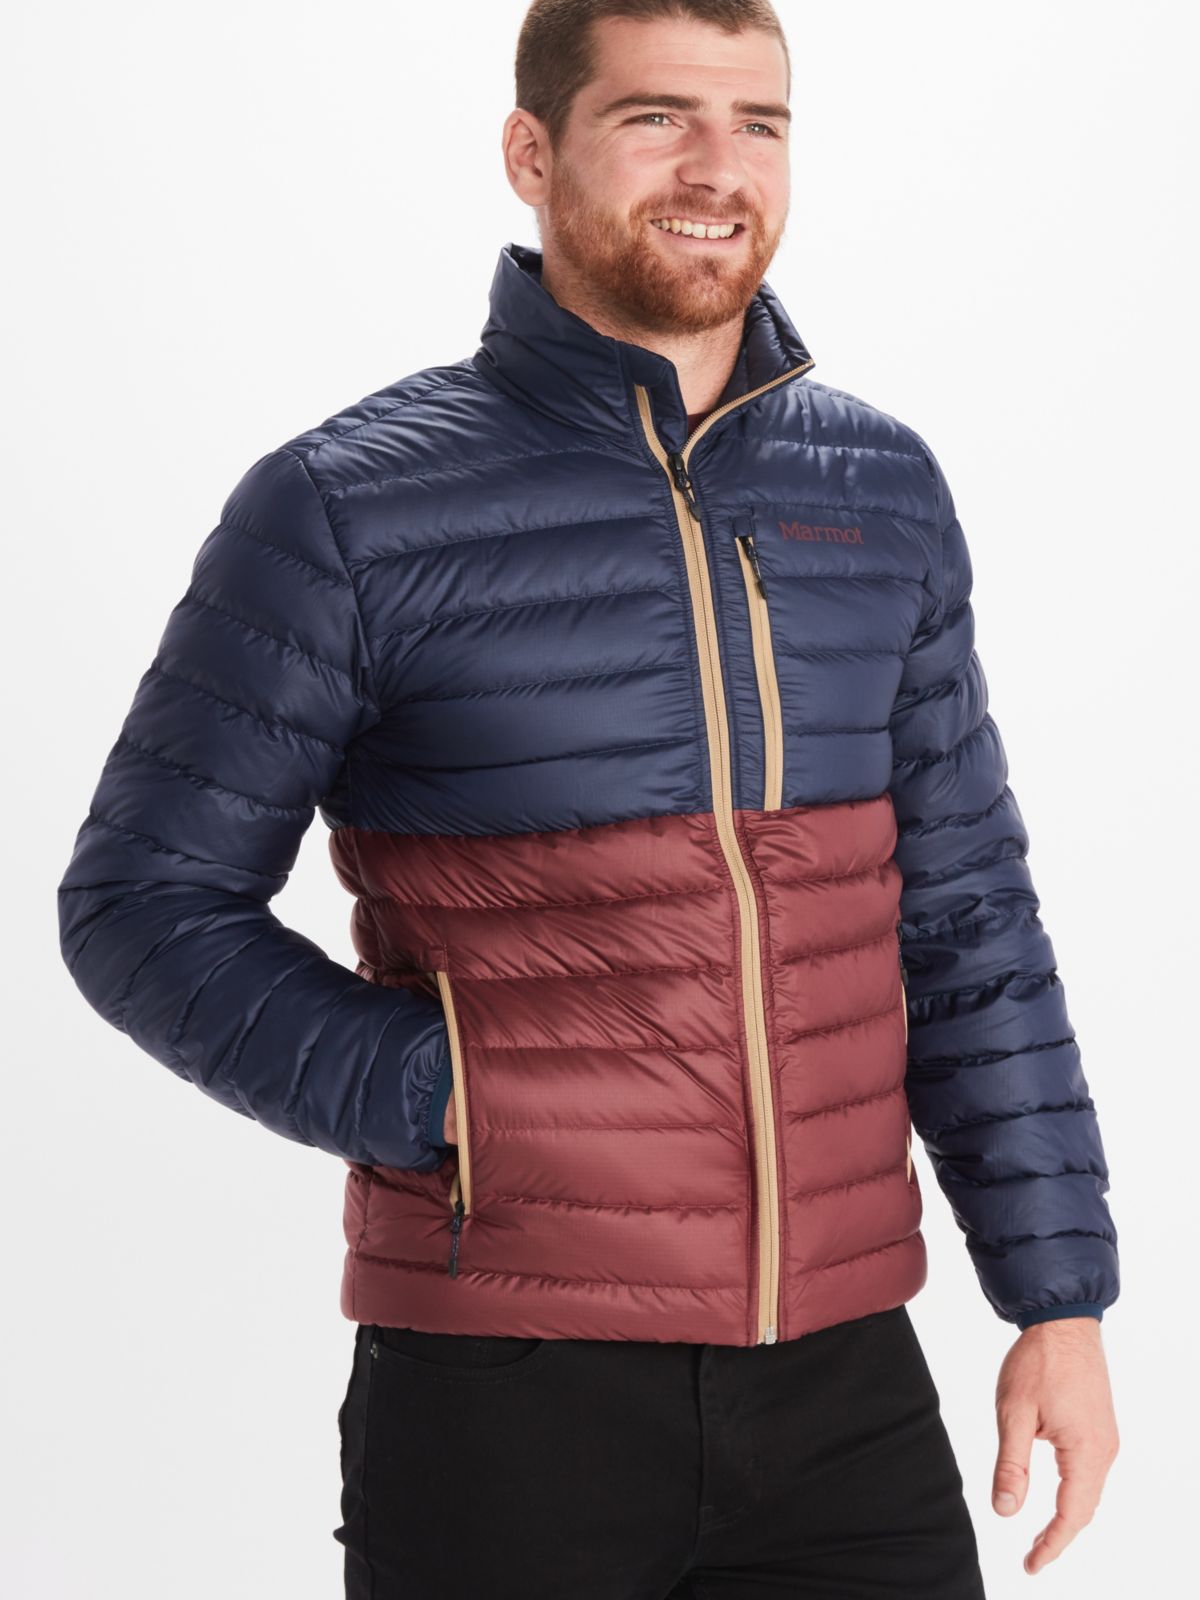 mens featherless down jacket worn by model